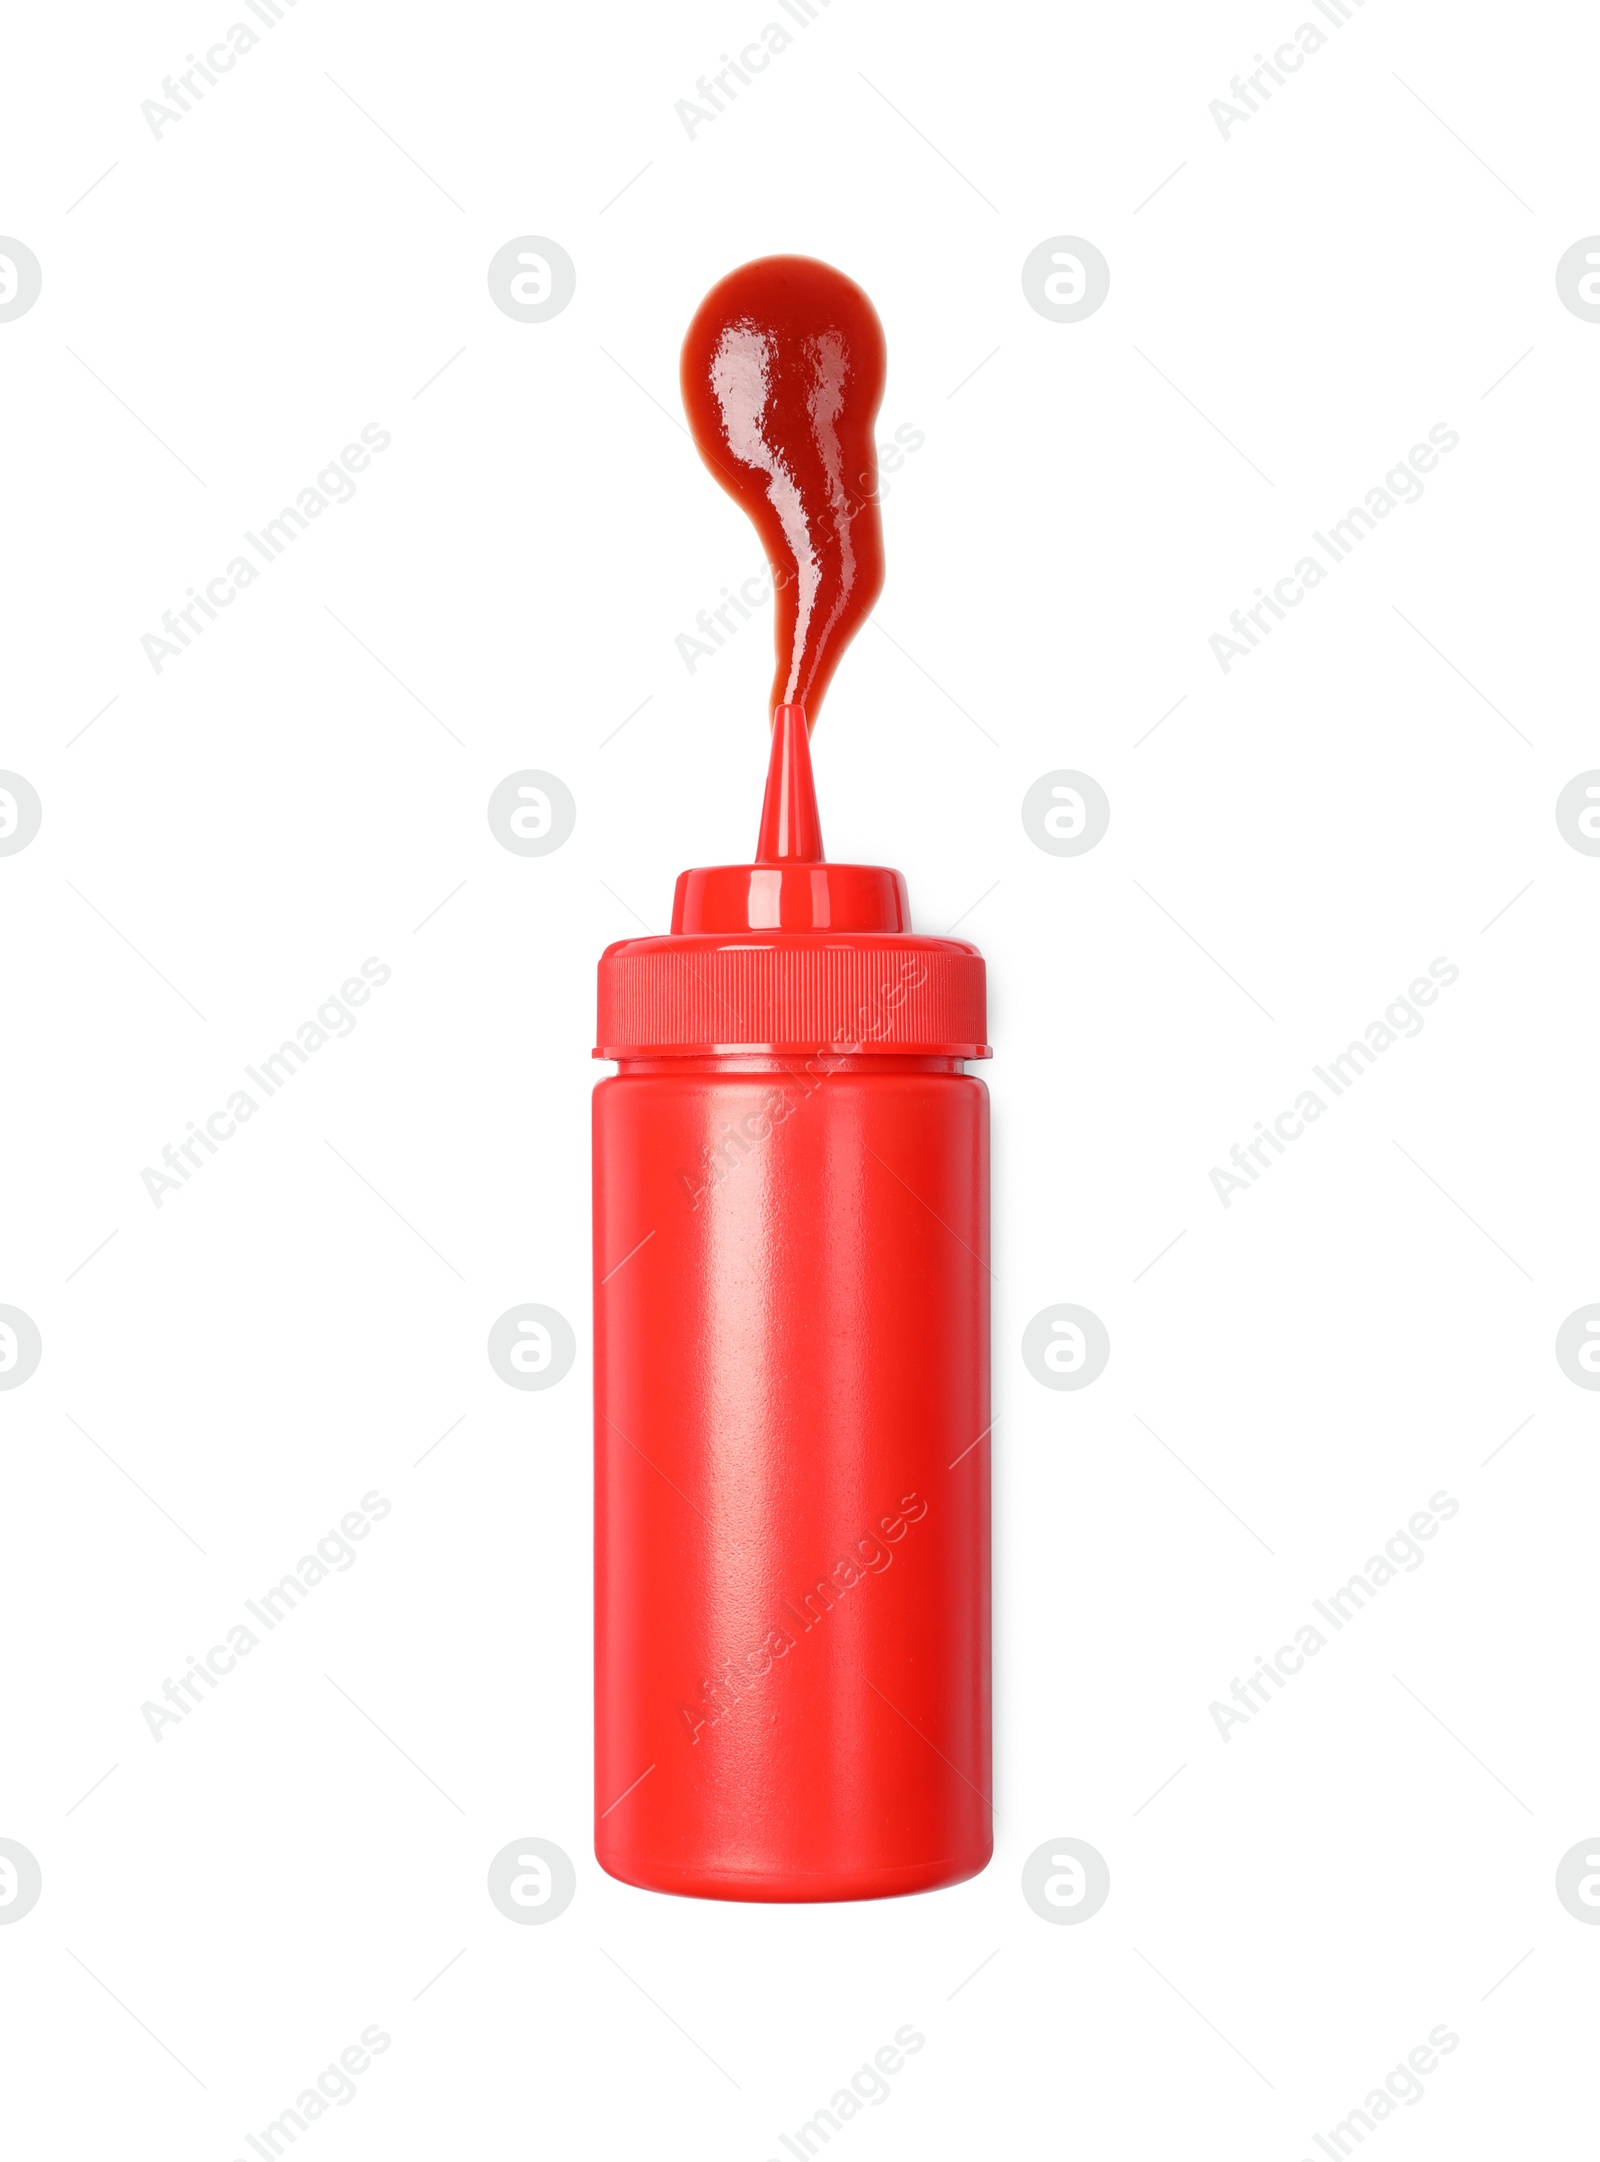 Photo of Squeezed ketchup from red bottle isolated on white, top view